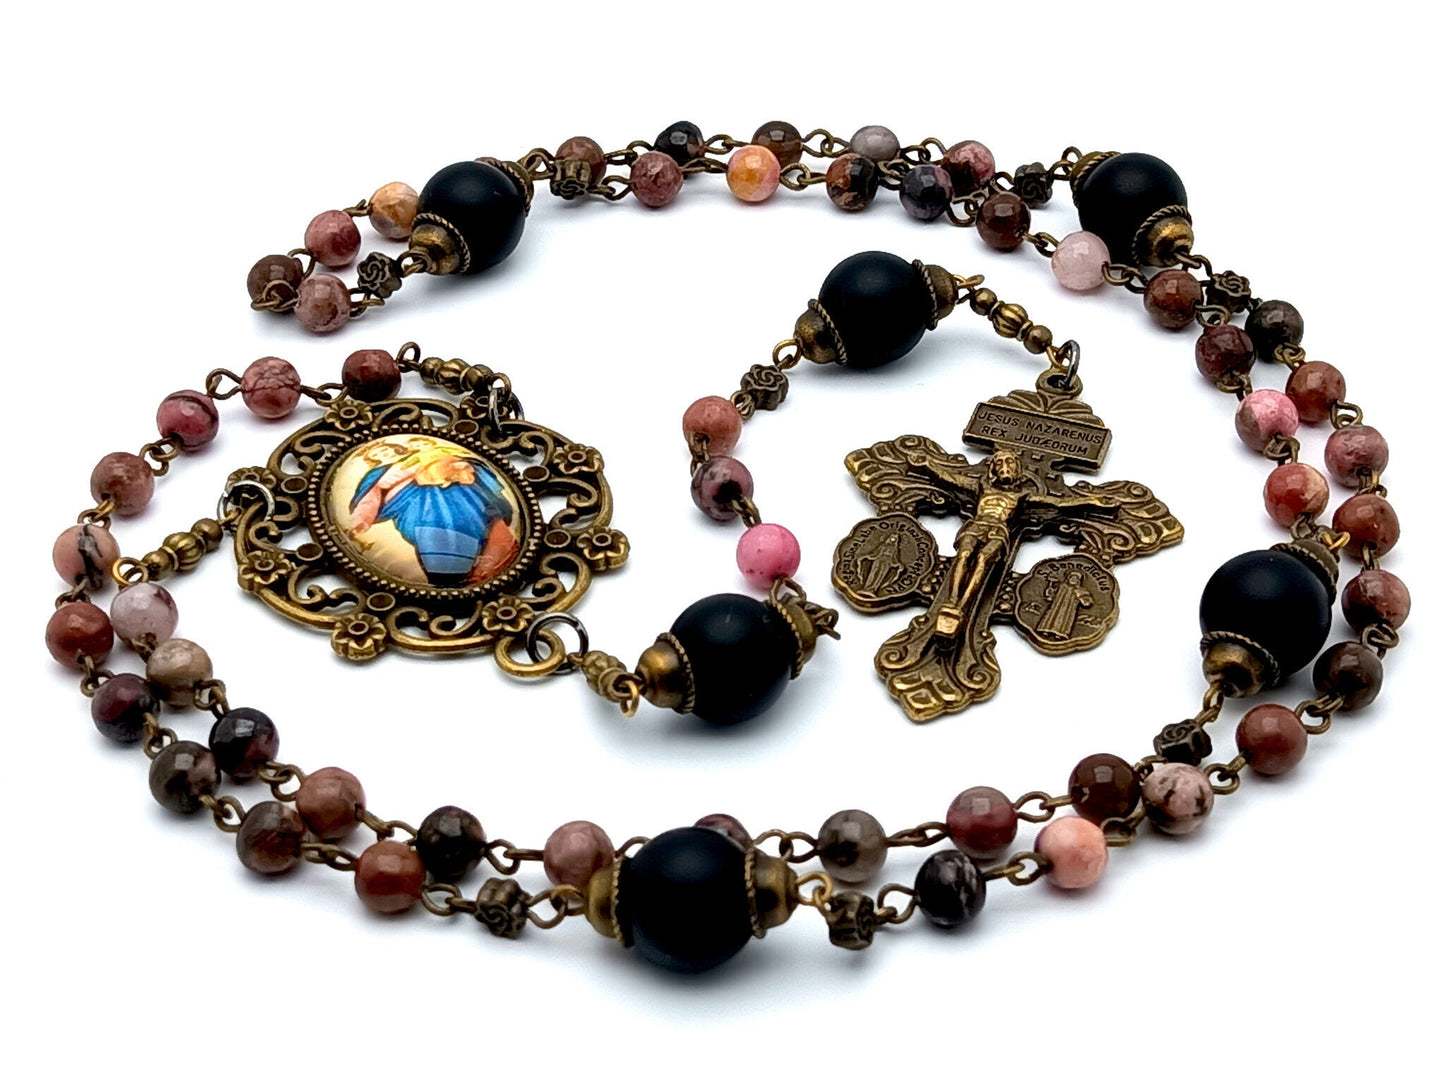 Our Lady help of Christians unique rosary beads with rhodonite and matt onyx gemstone beads, brass pardon crucifix and picture centre medal.